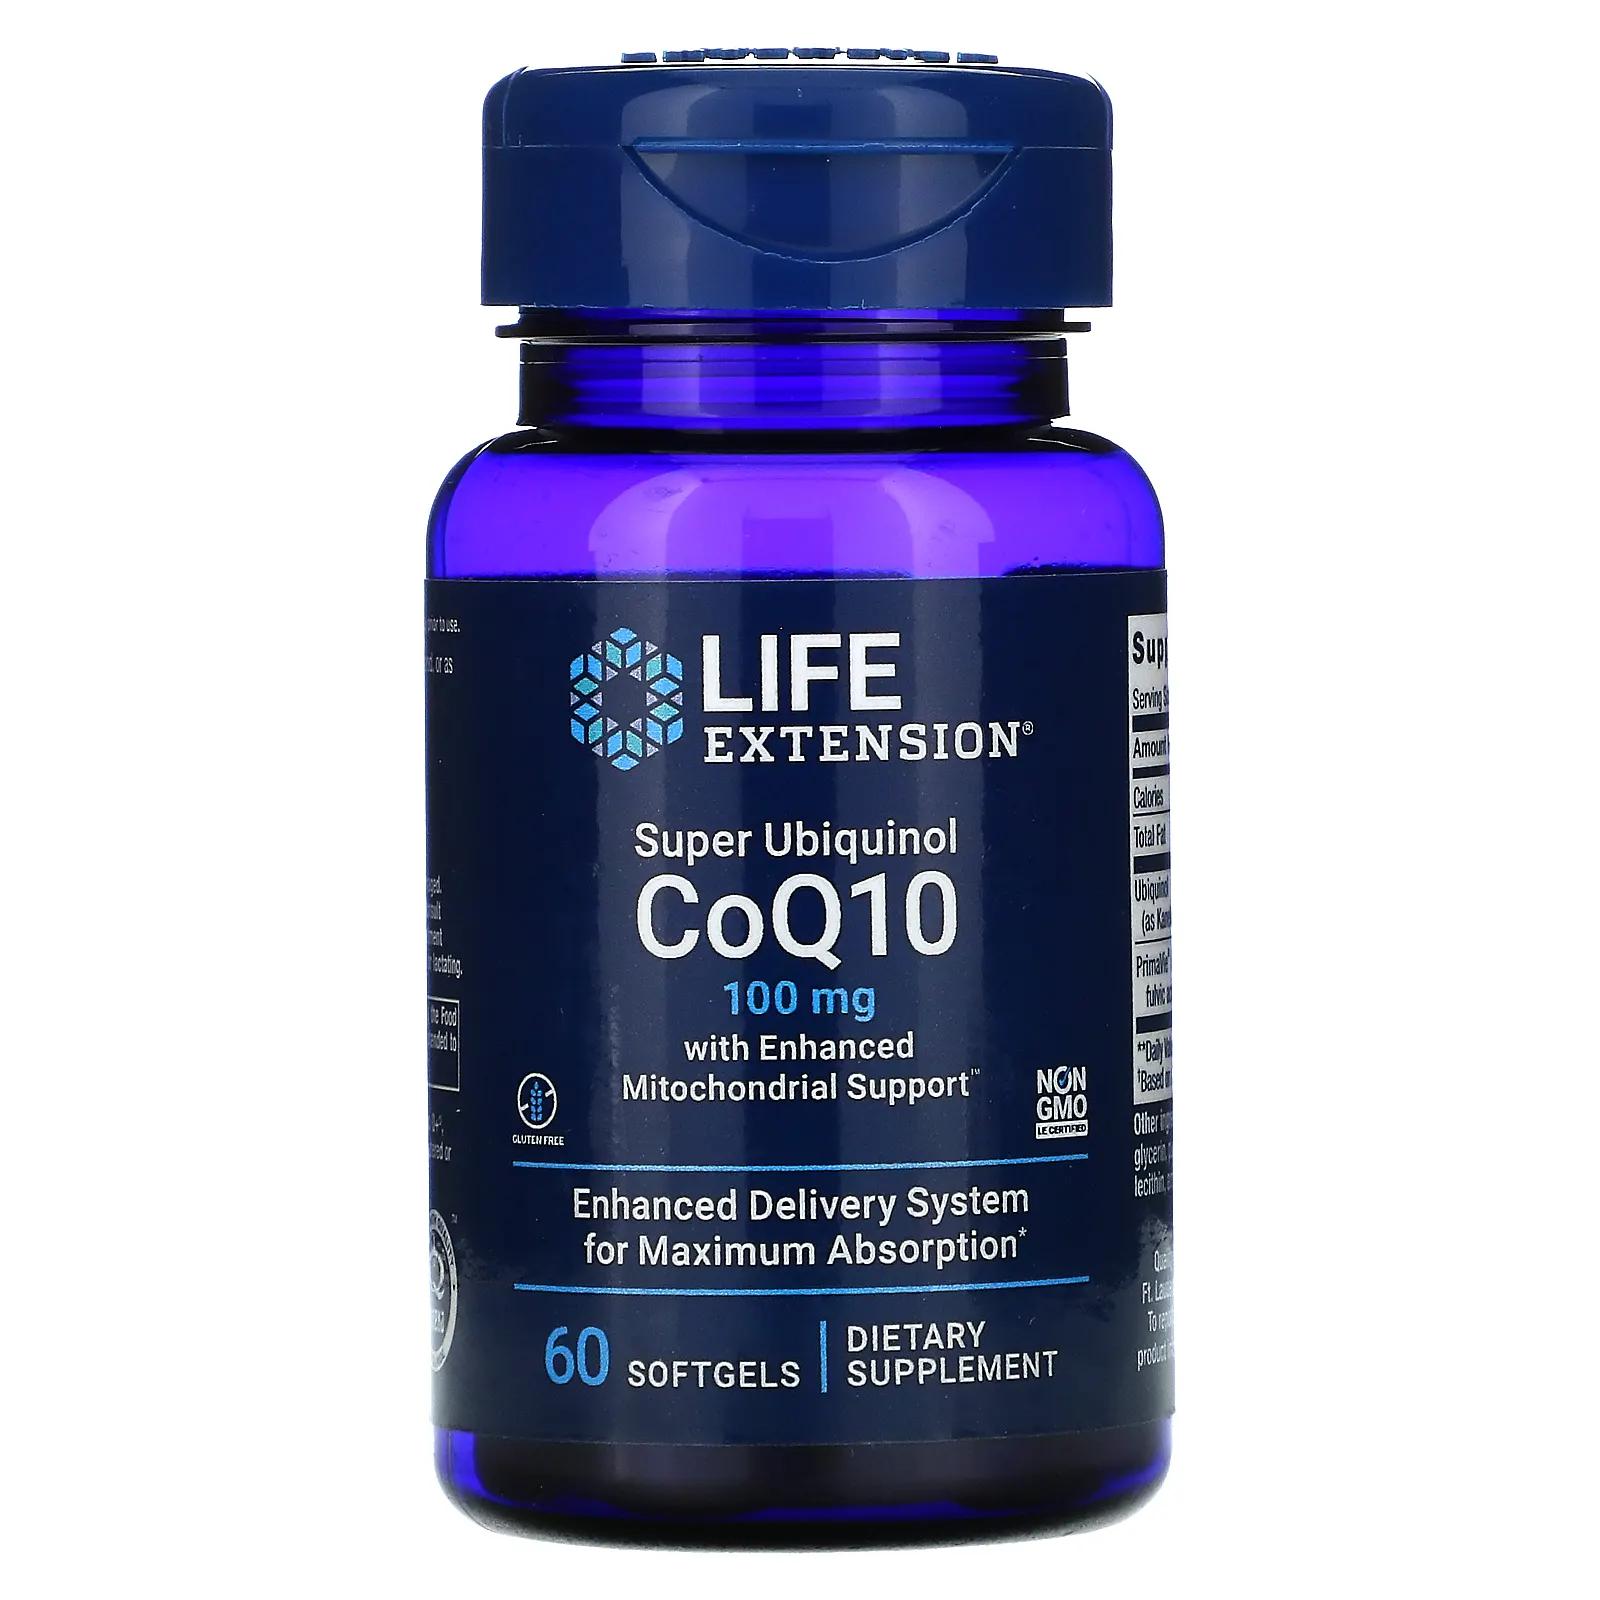 life extension life extension mix tablets 240 tablets Life Extension Super Ubiquinol CoQ10 with Enhanced Mitochondrial Support 100 mg 60 Softgels